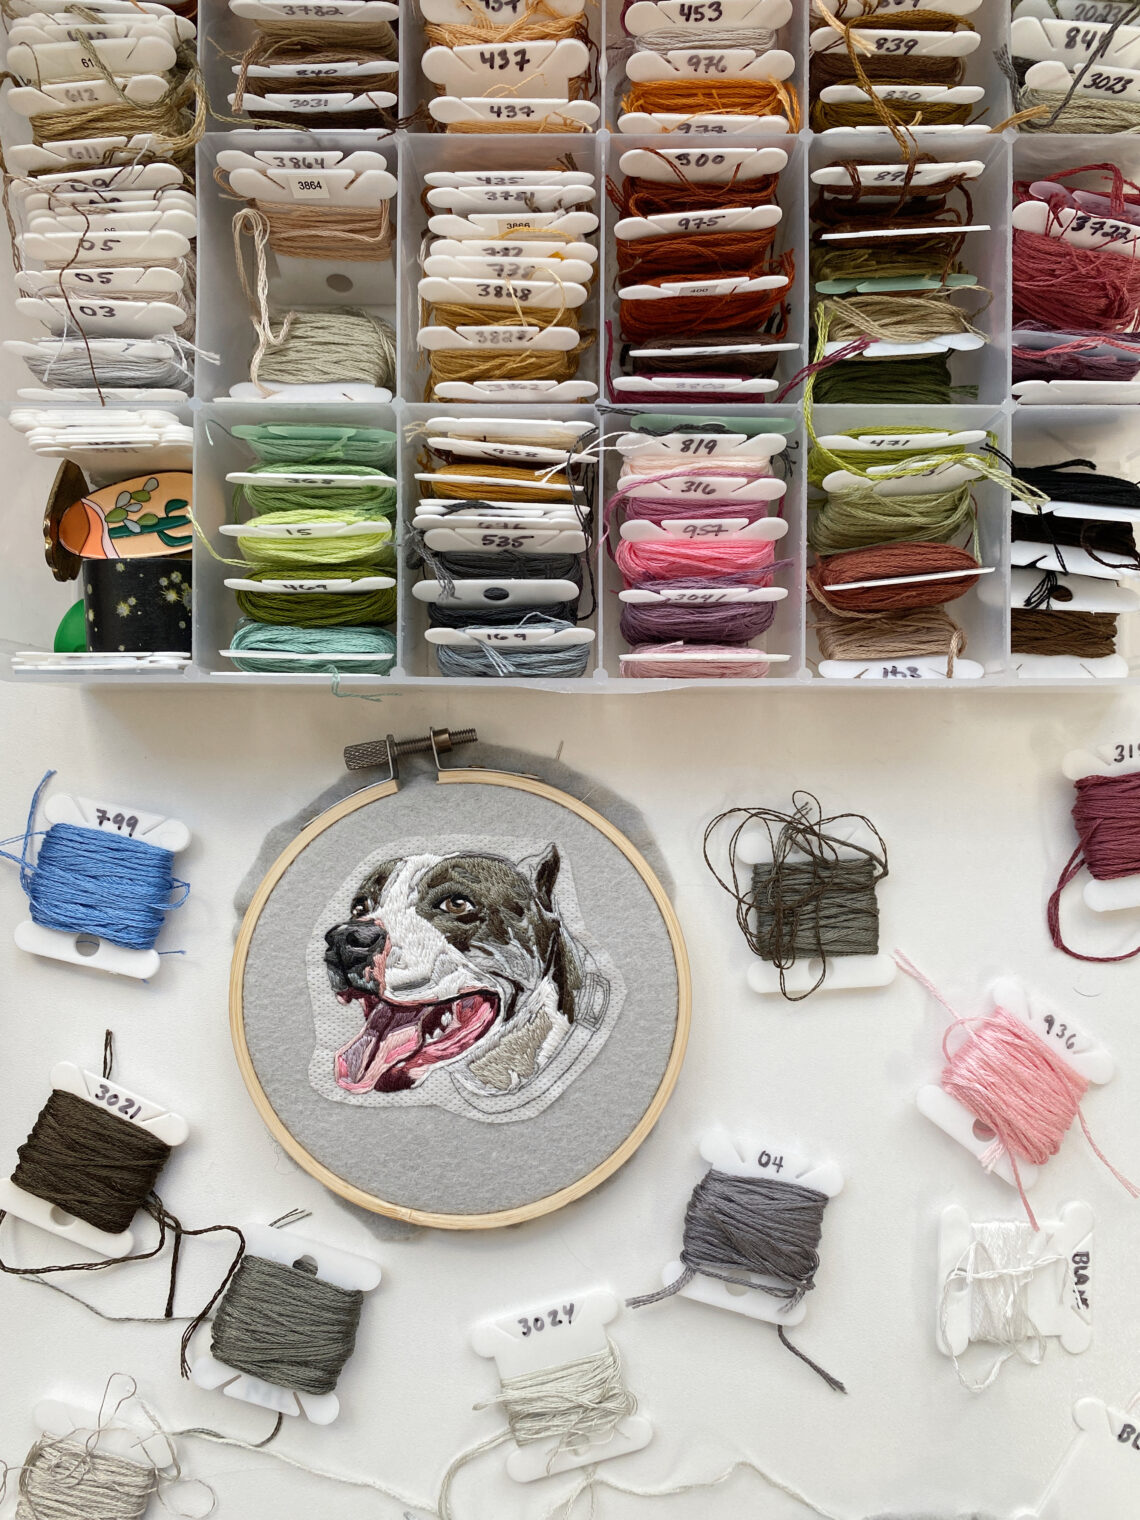 31 Embroidery Storage ideas  embroidery floss storage, embroidery,  embroidery floss